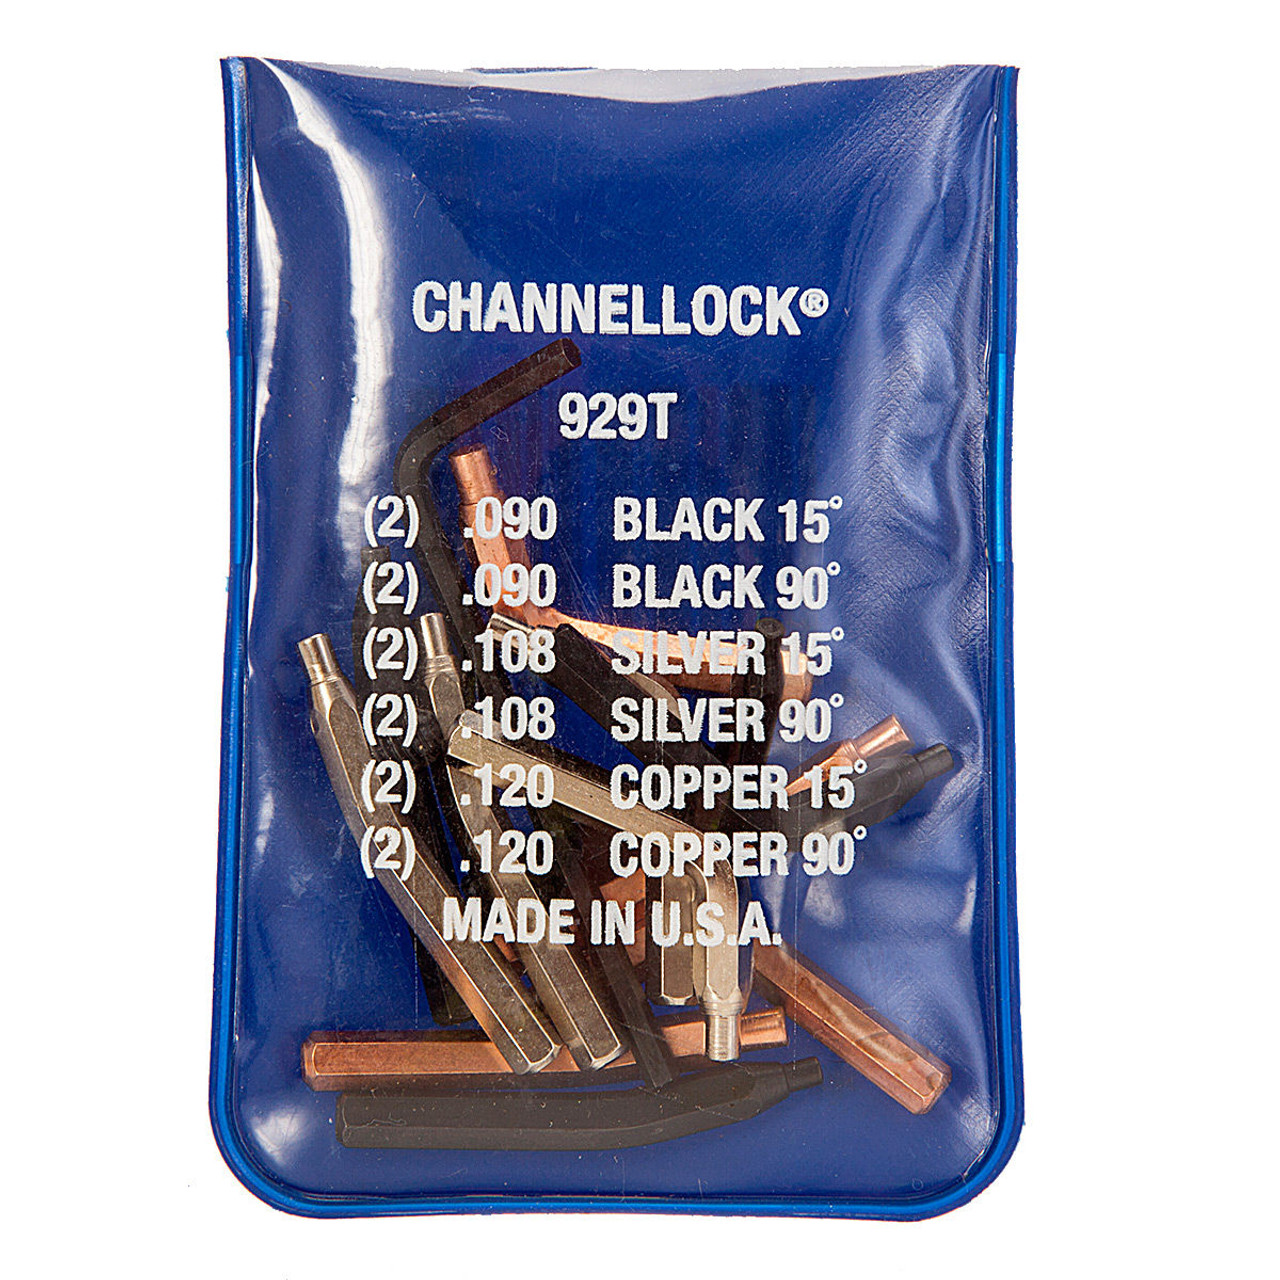 Channellock 929T Universal Retaining Ring Tip Kit 5 Pieces